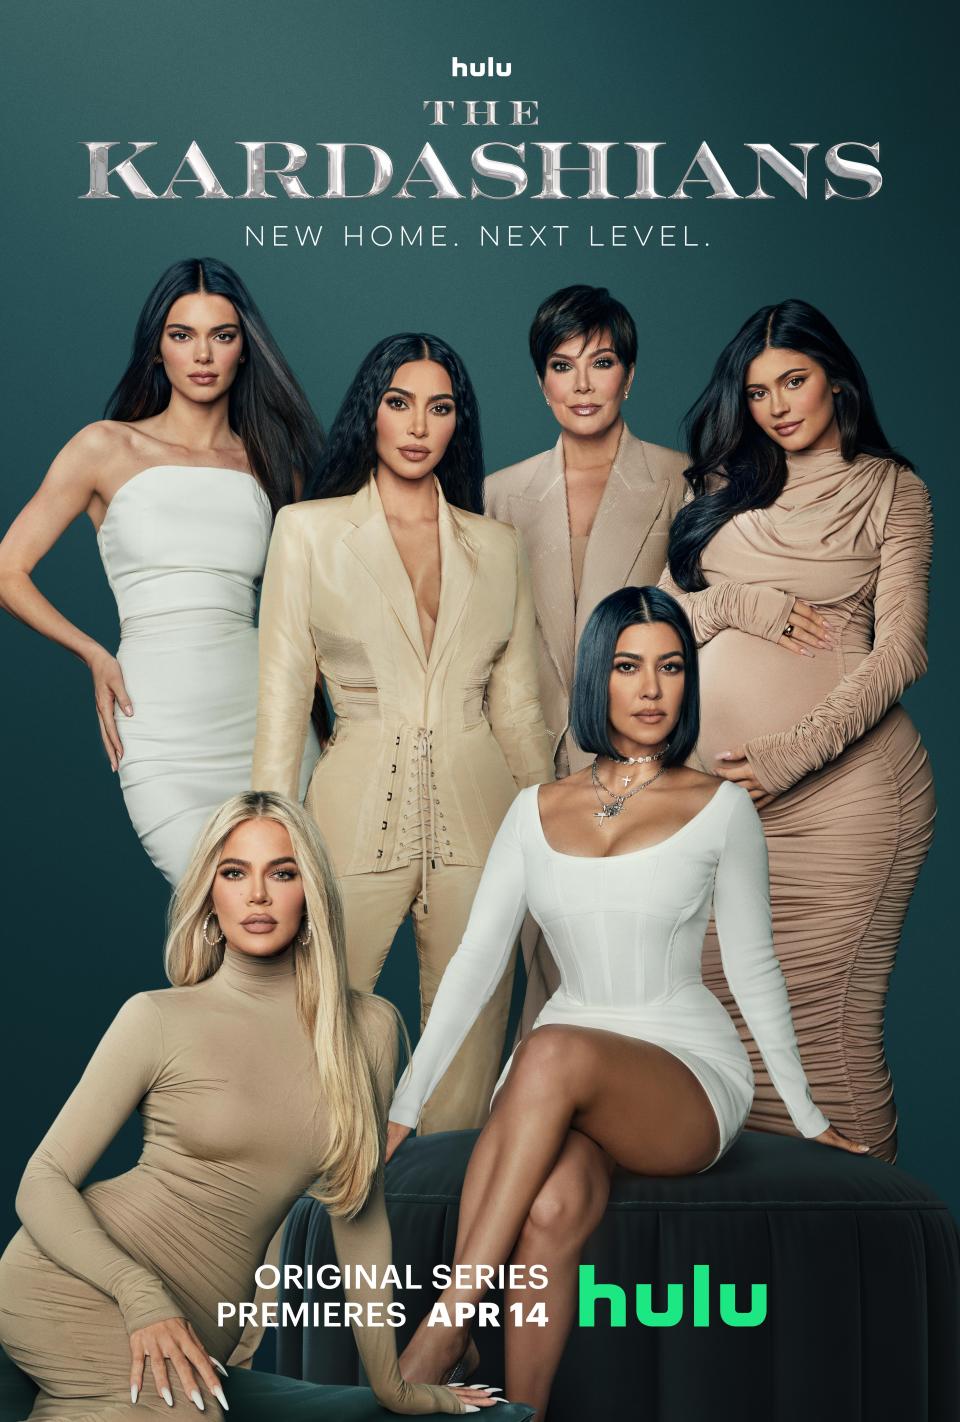 Fifteen years after E!'s "Keeping Up With the Kardashians" premiered, the Kardashian-Jenner family remains relevant.